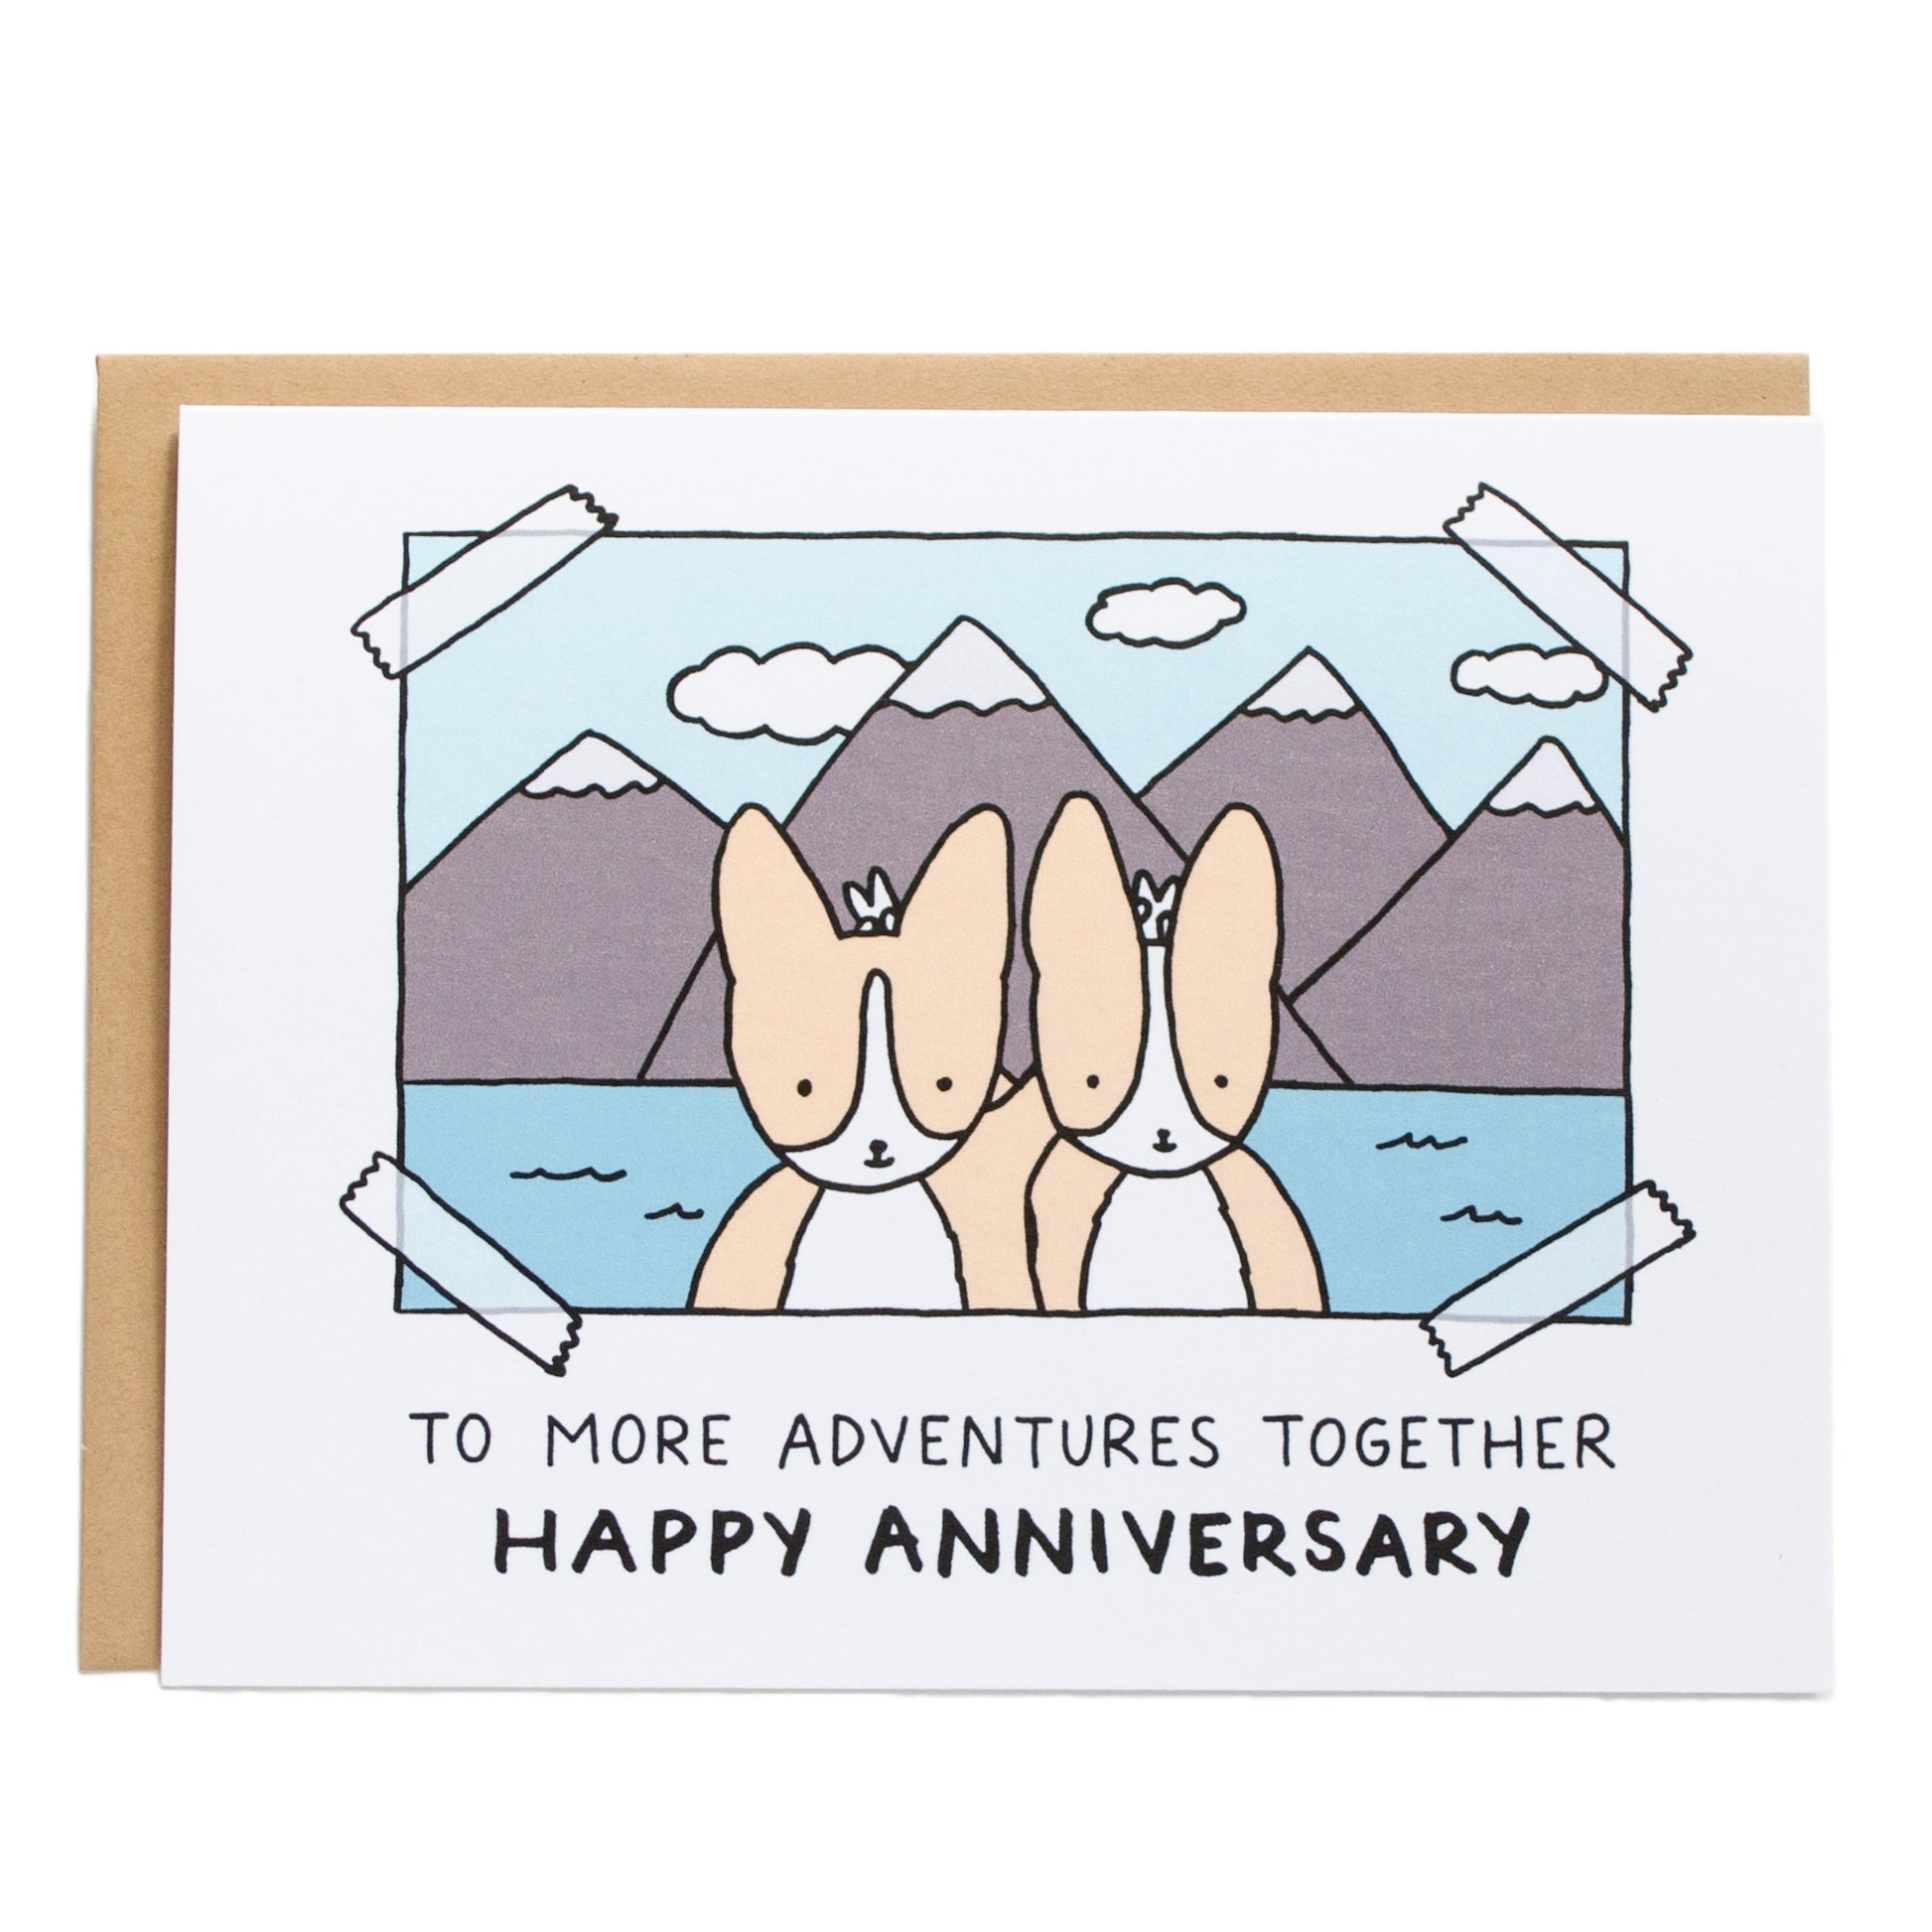 a taped photograph of two corgis putting bunny ears on each other in front of a scenic background of mountains, card reads, to more adventures together, happy anniversary